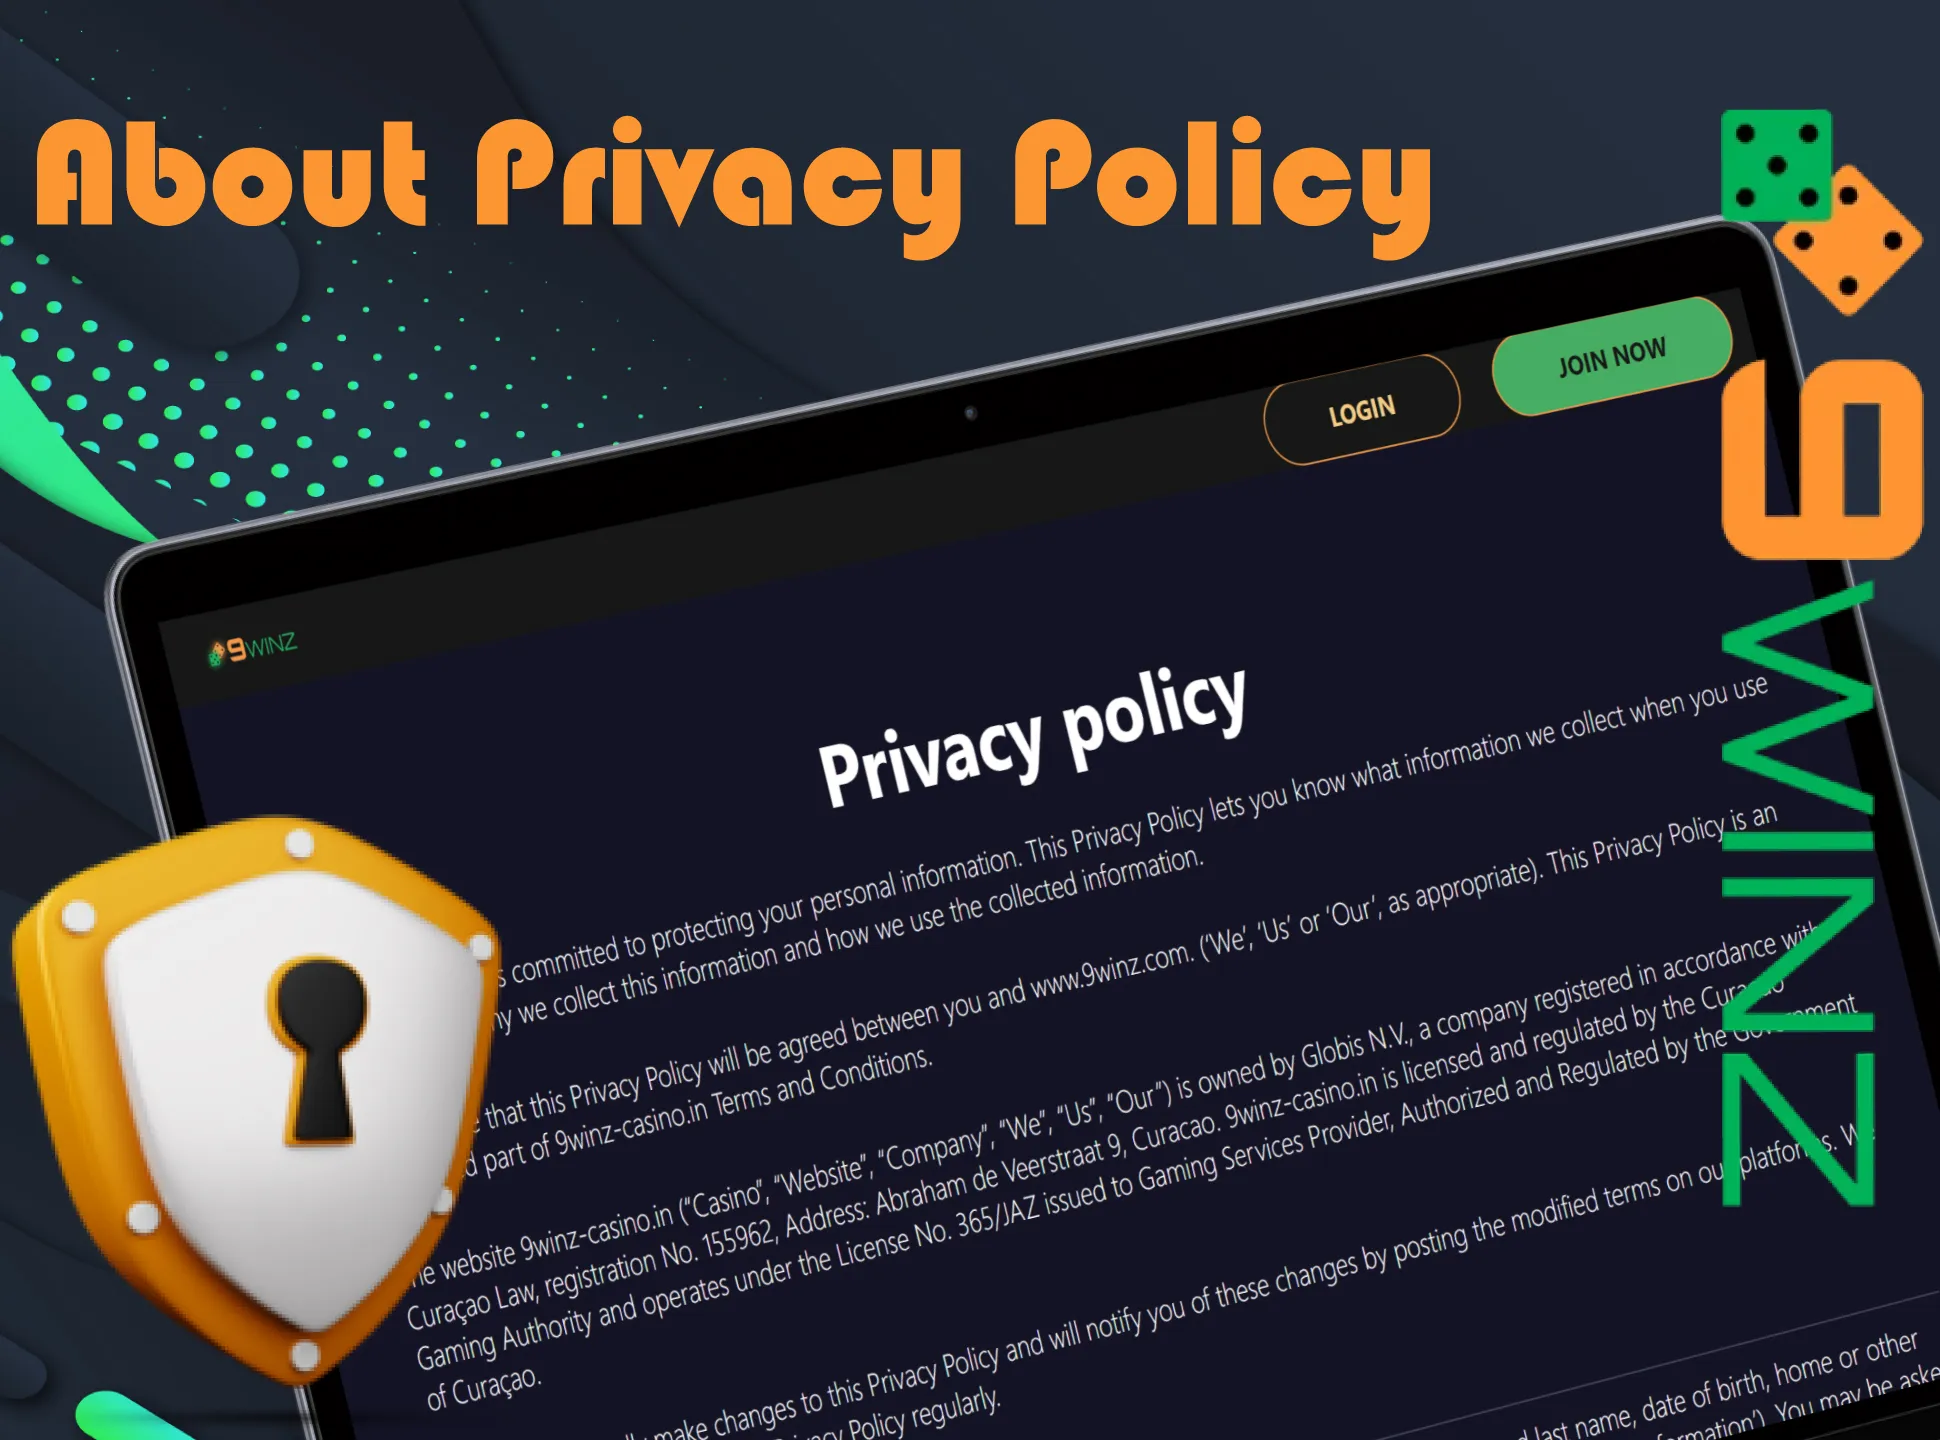 Learn more about 9winz privacy policy on special page.